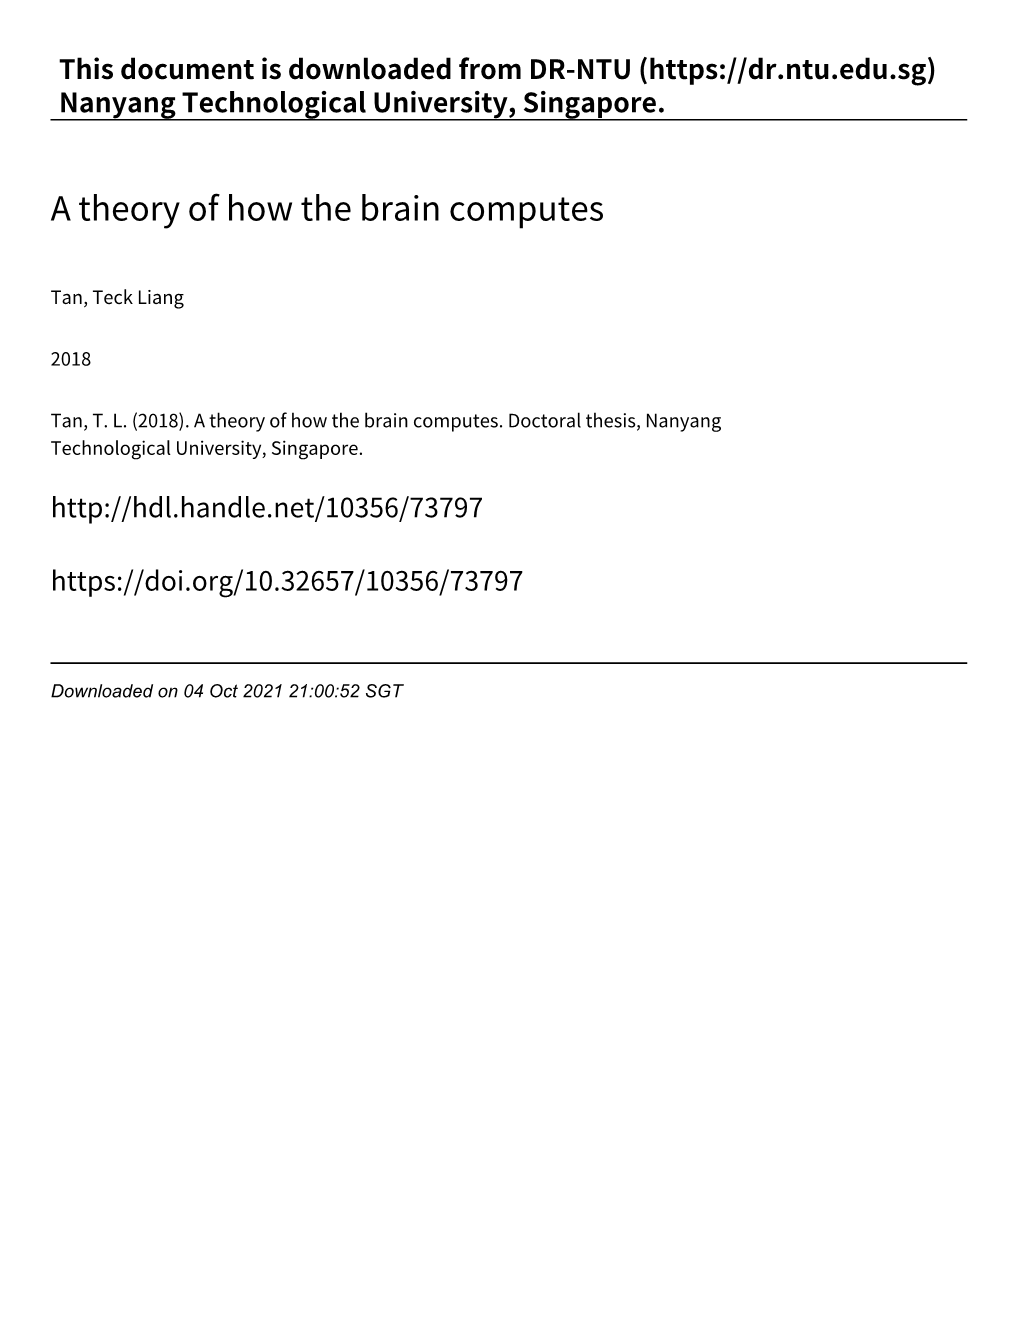 A Theory of How the Brain Computes